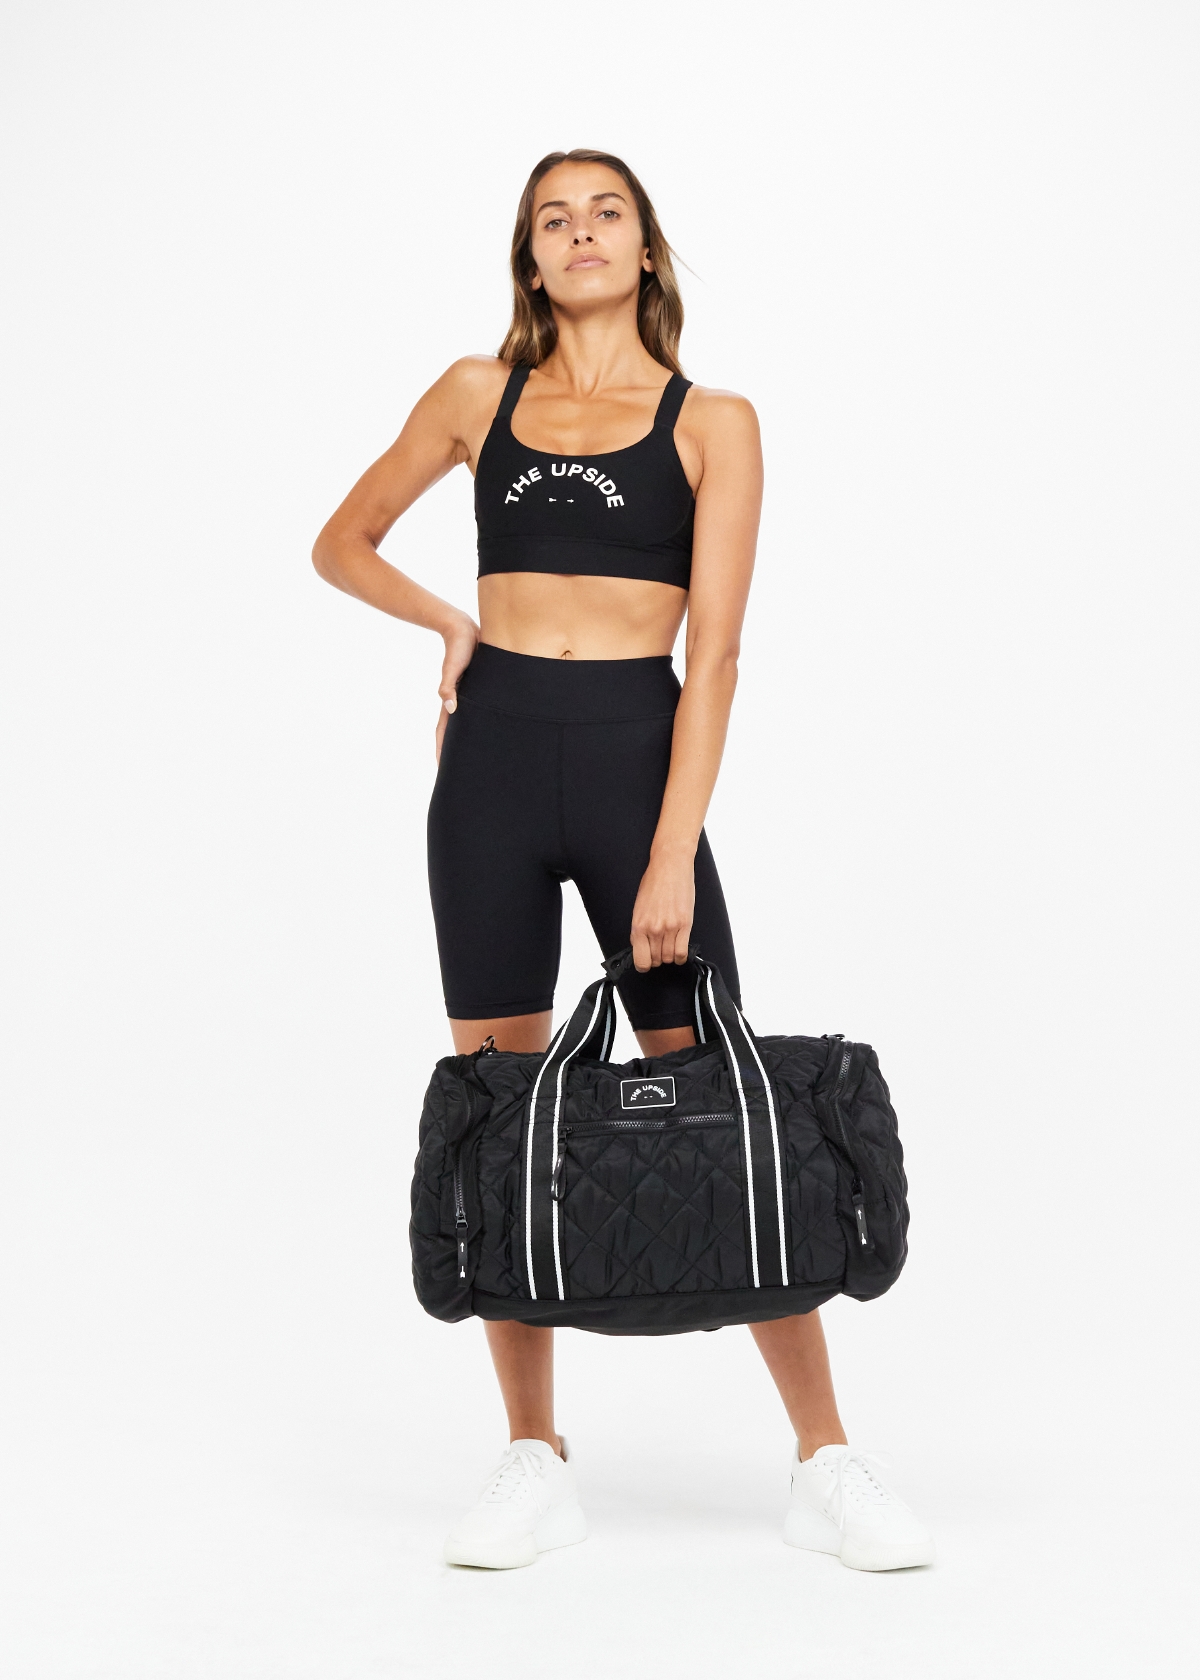 ALL STARS MUSE GYM BAG in BLACK | The UPSIDE